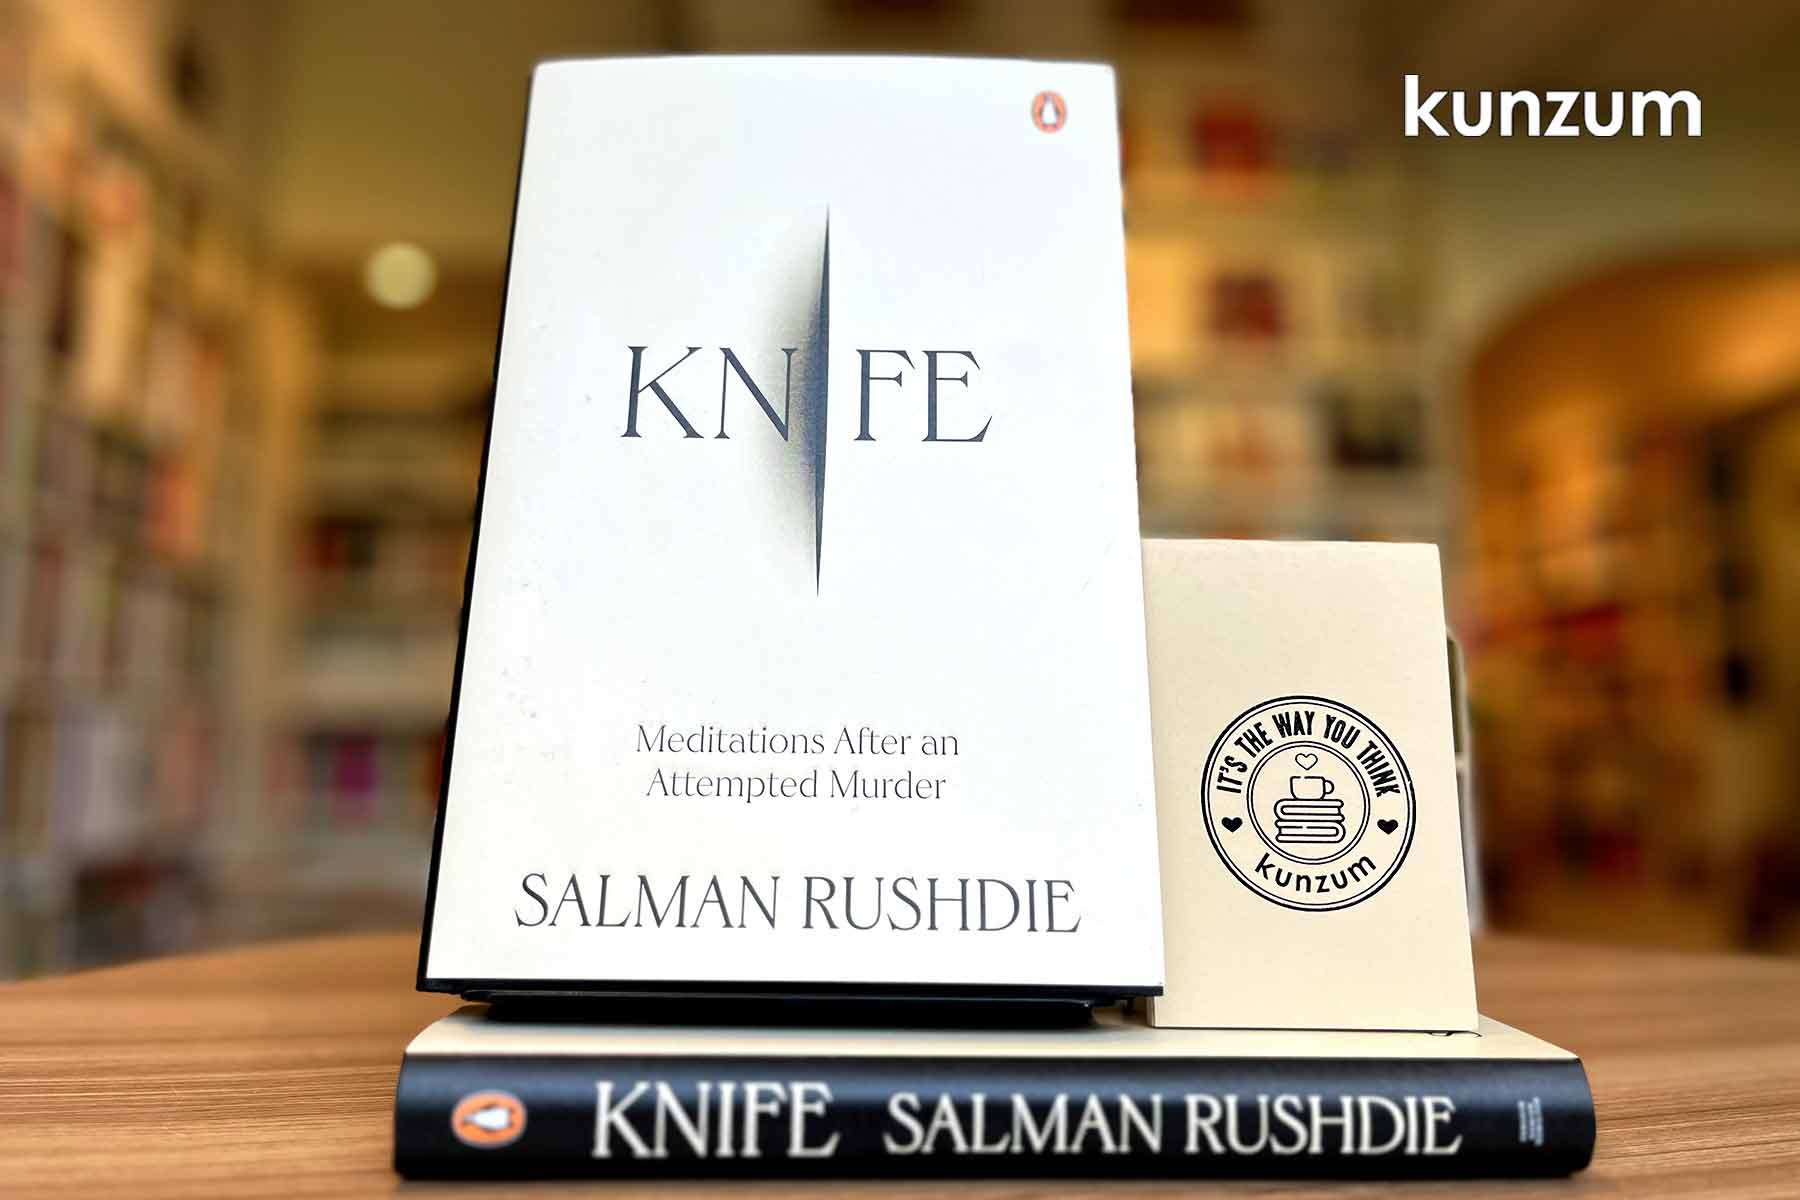 Book Review: In Knife, Salman Rushdie Reflects on His Near-Death, and Life After